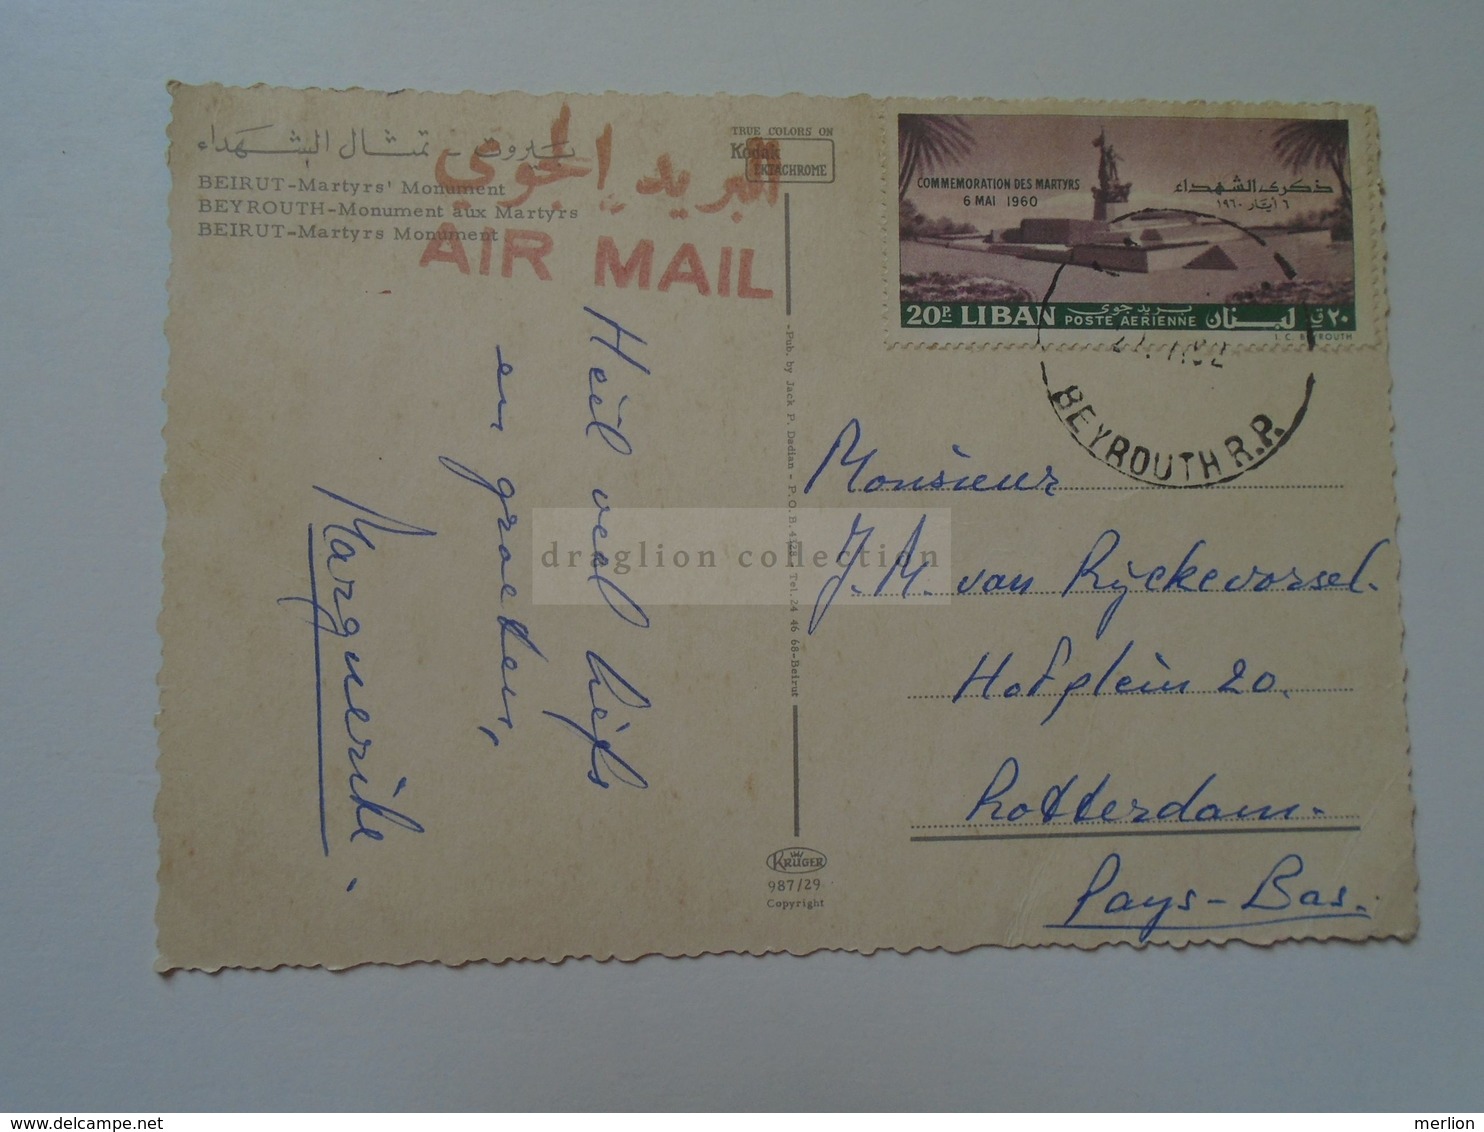 ZA275.26  LEBANON  LIBAN  -Postcard Cancel Beyrouth  Beirut  Stamp Commemorating The Martyrs PU 1962  Martyr's Monument - Liban